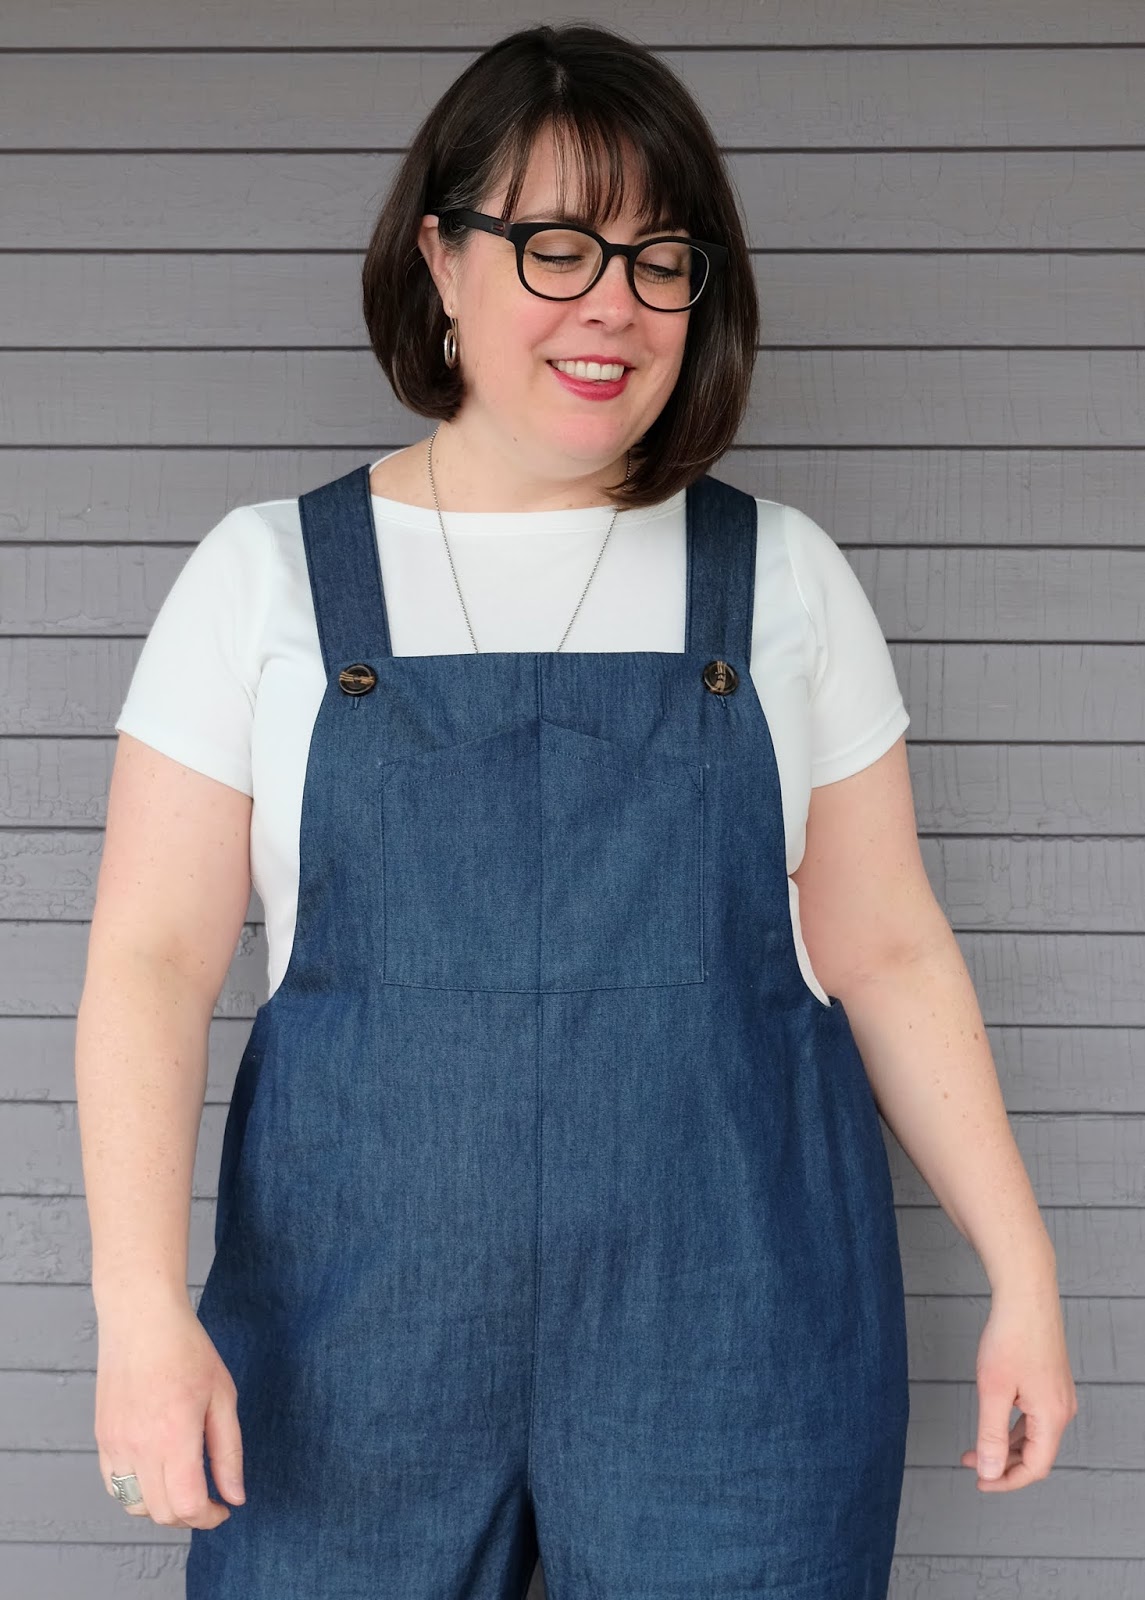 How to Add Belt Loops to the Yanta Overalls » Helen's Closet Patterns